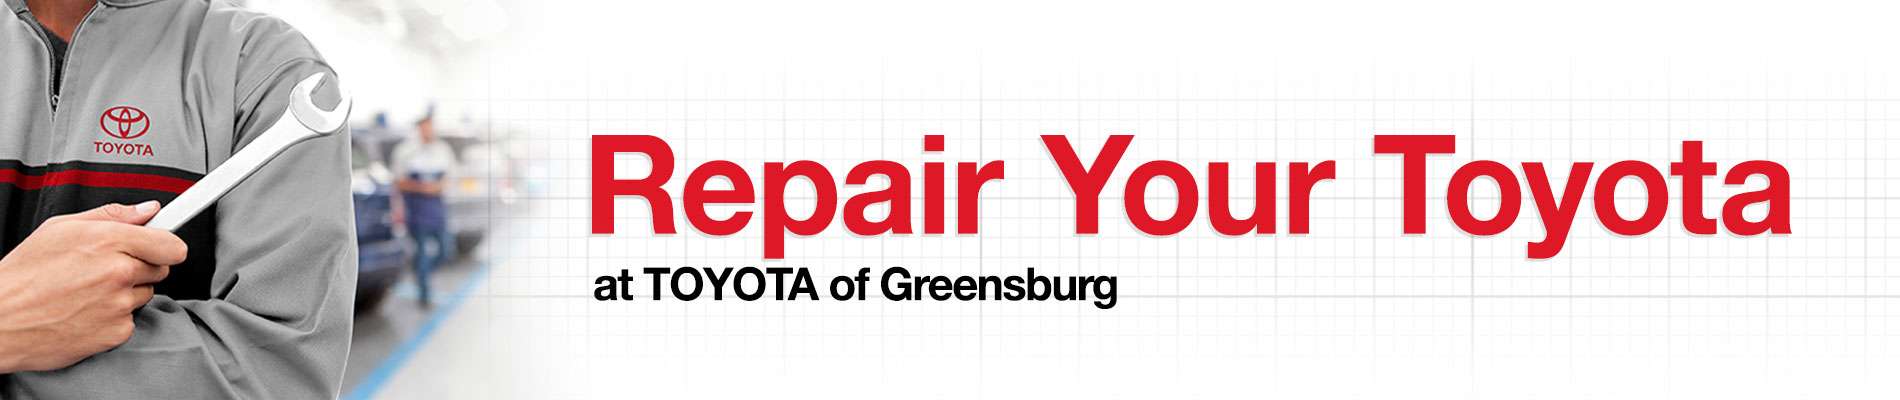 Why Have Your Toyota Repaired at Toyota of Greensburg?